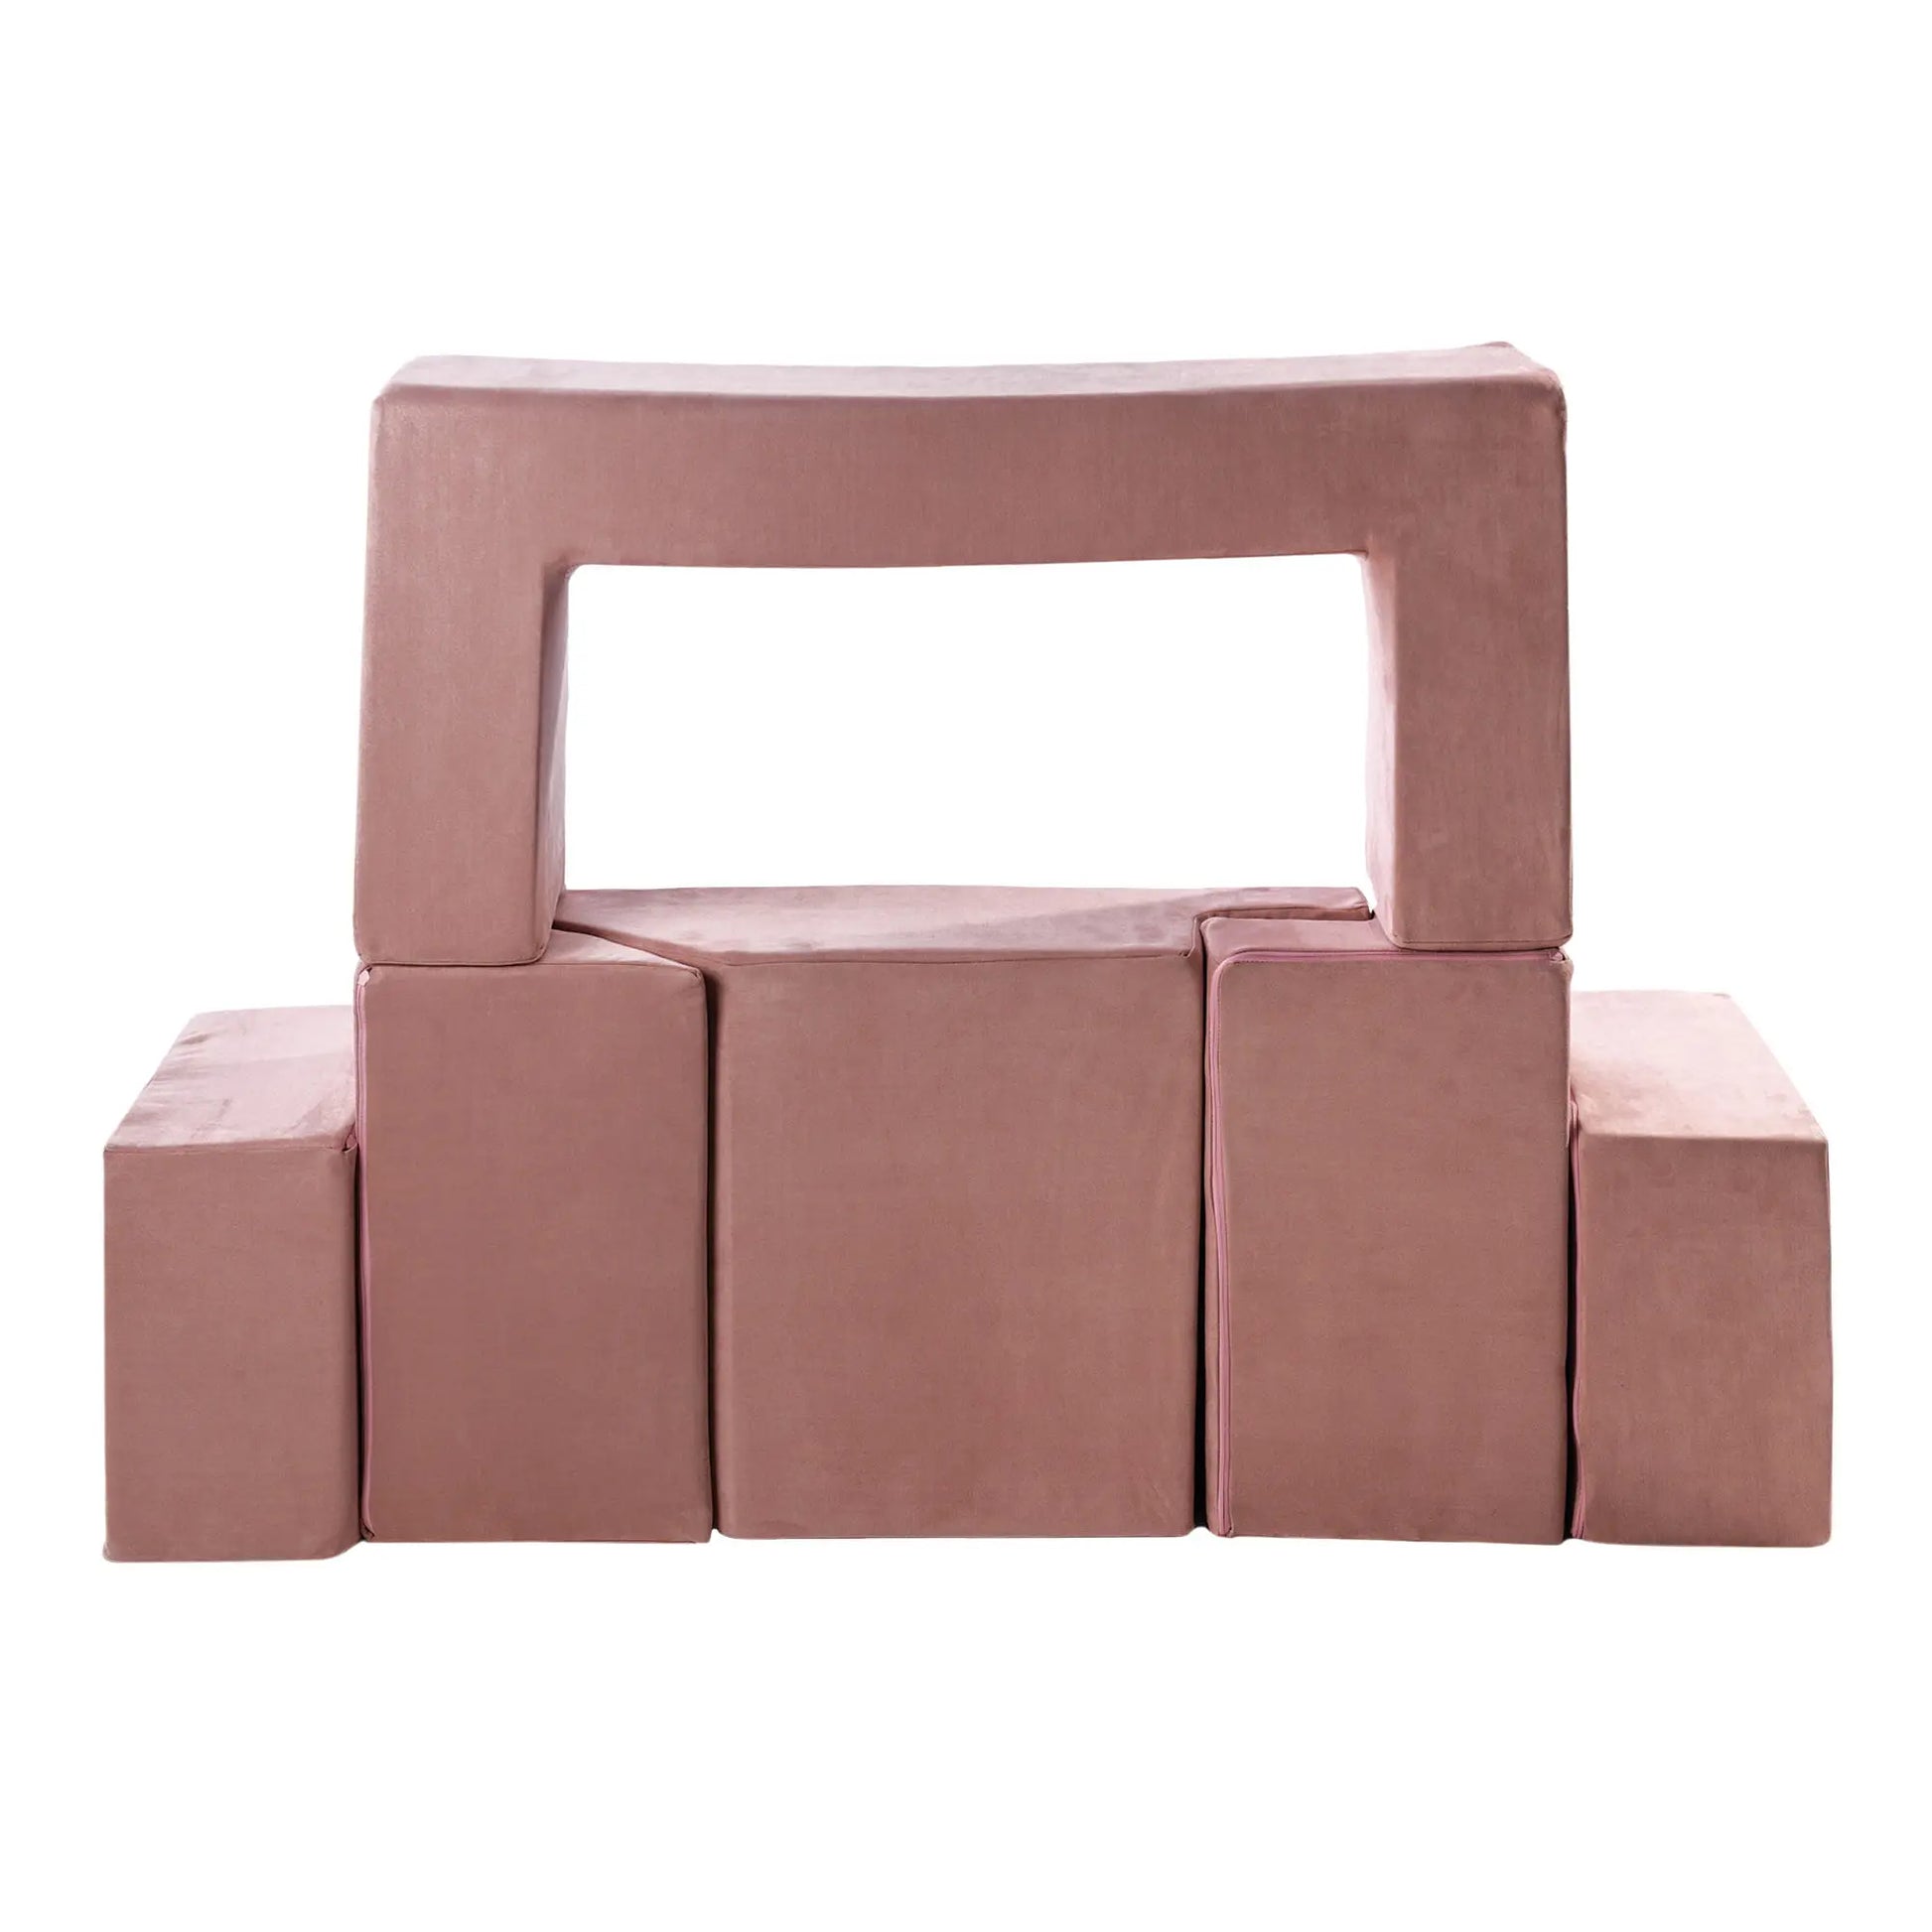 A pink multifunctional playground set for children, featuring soft velvet blocks for safe and creative play configurations. Ideal for active kids and educational spaces.